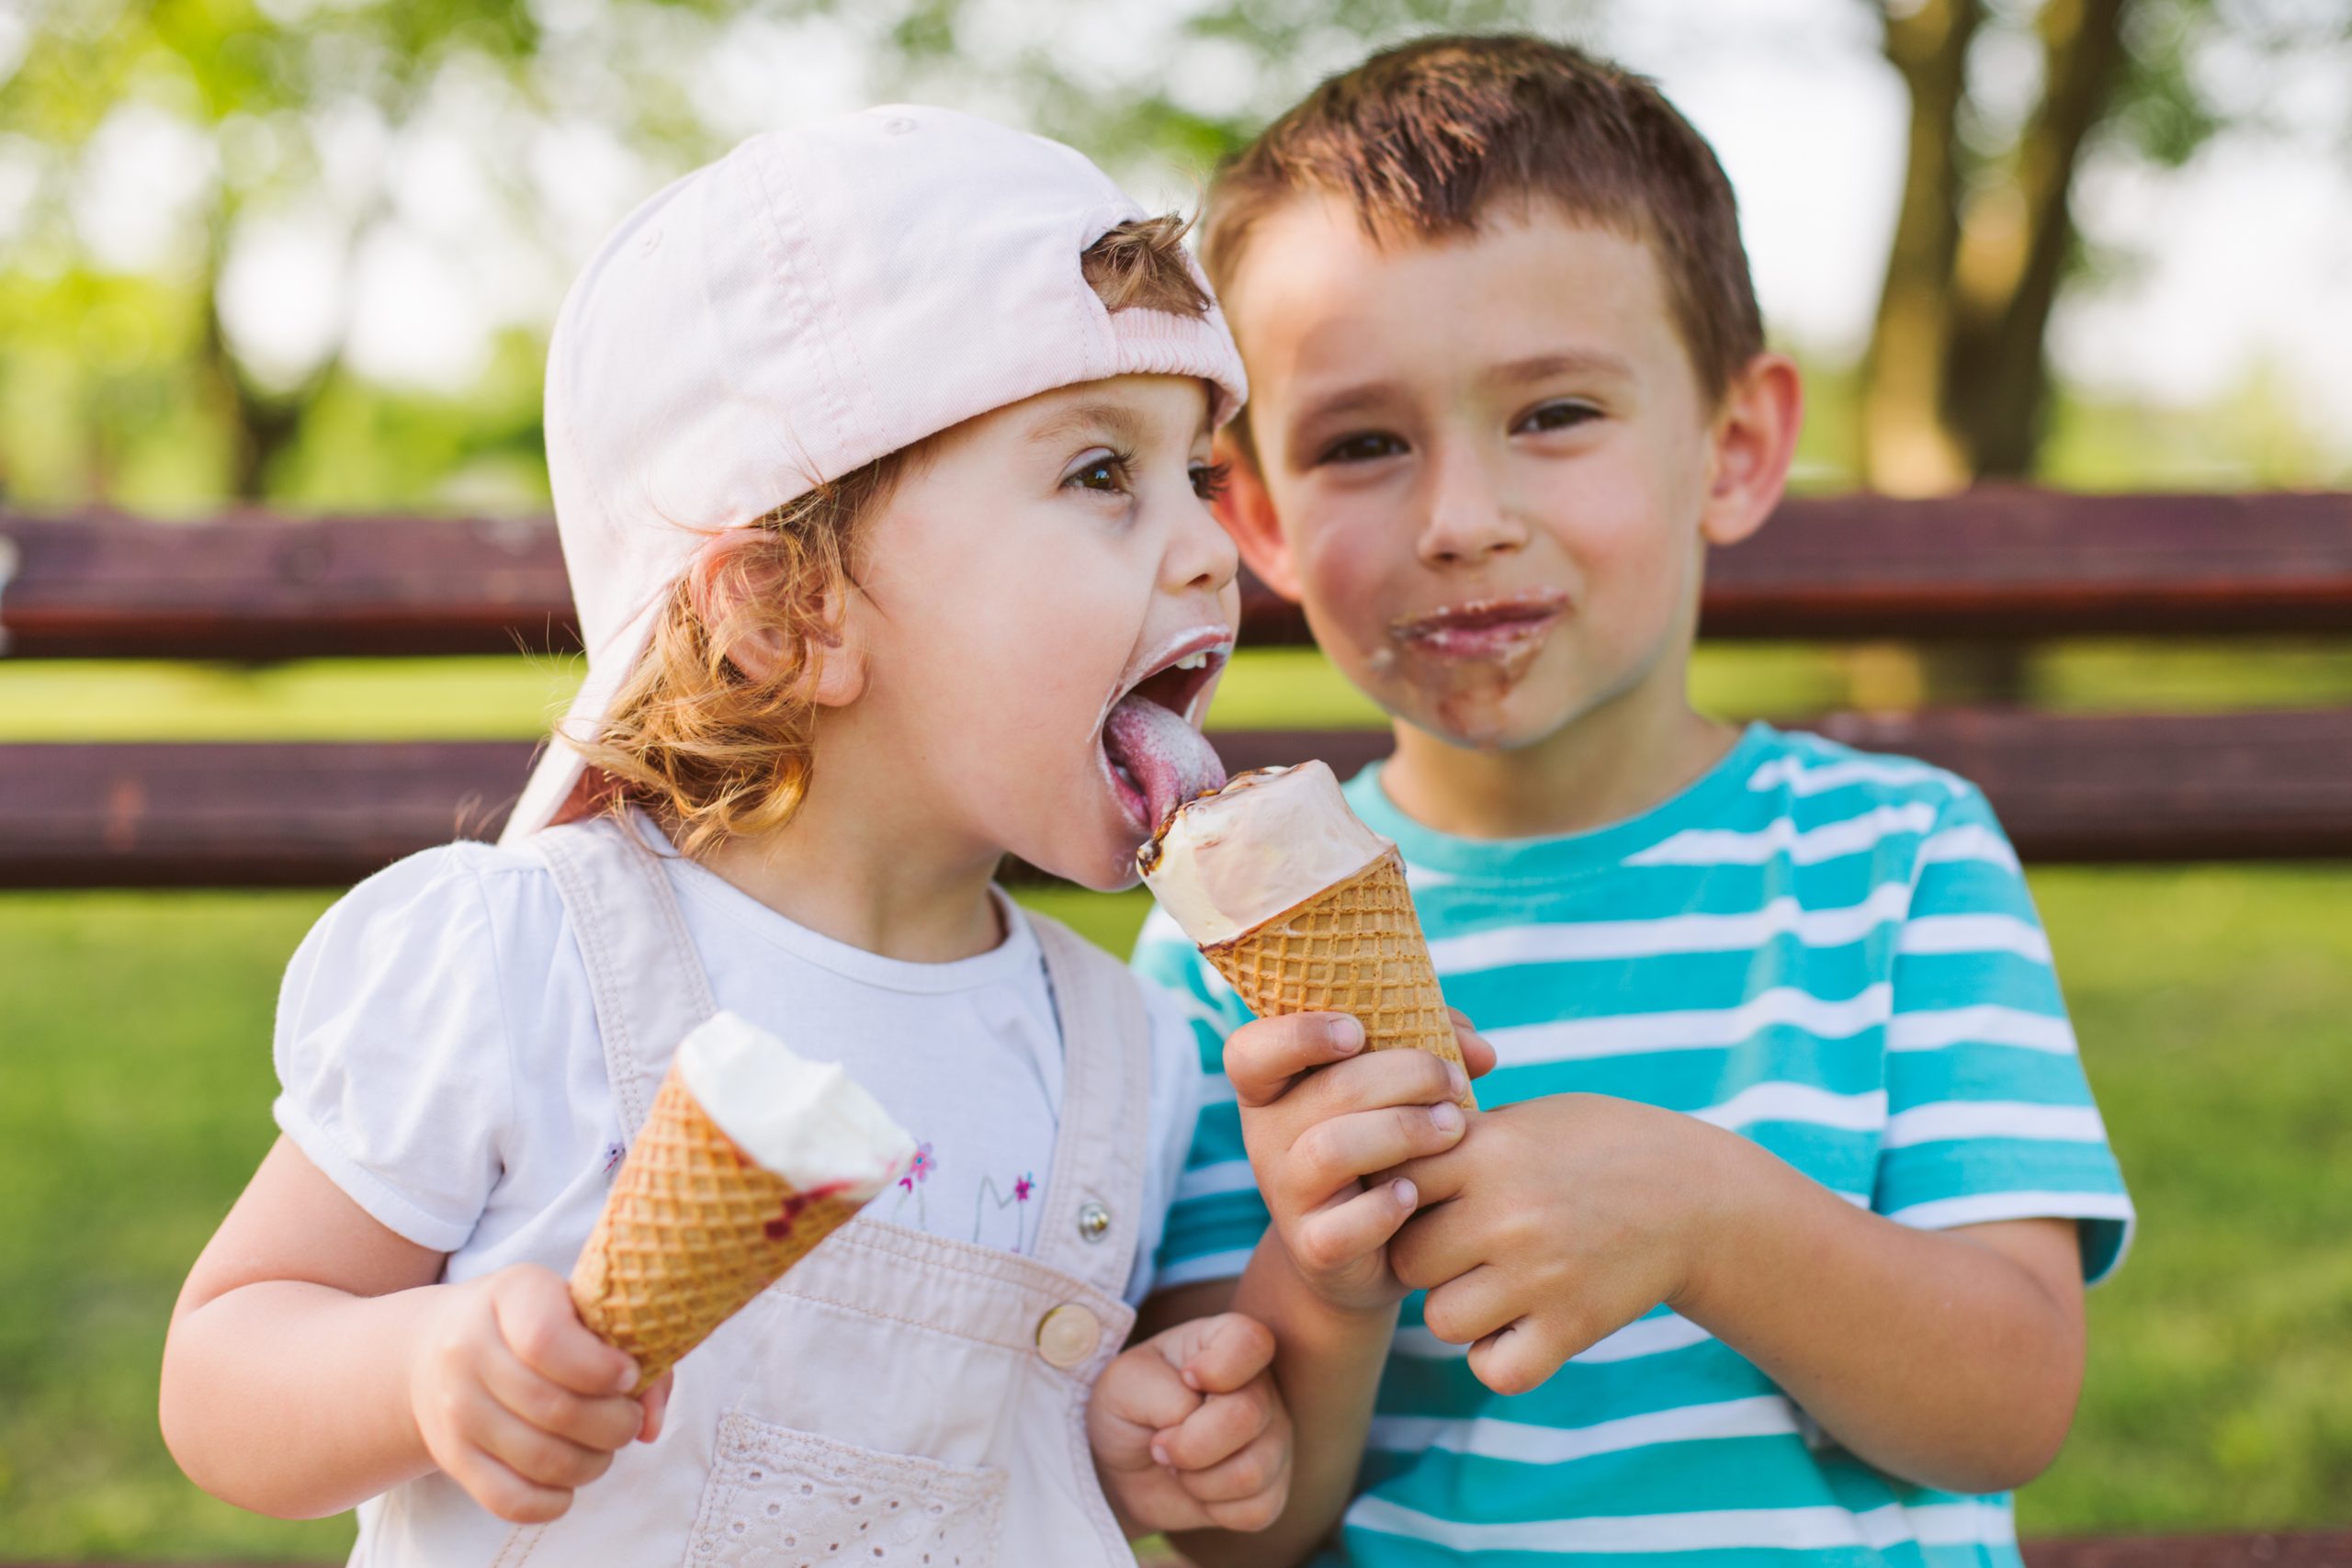 two children close in age sharing ice cream cones (having kids close together)